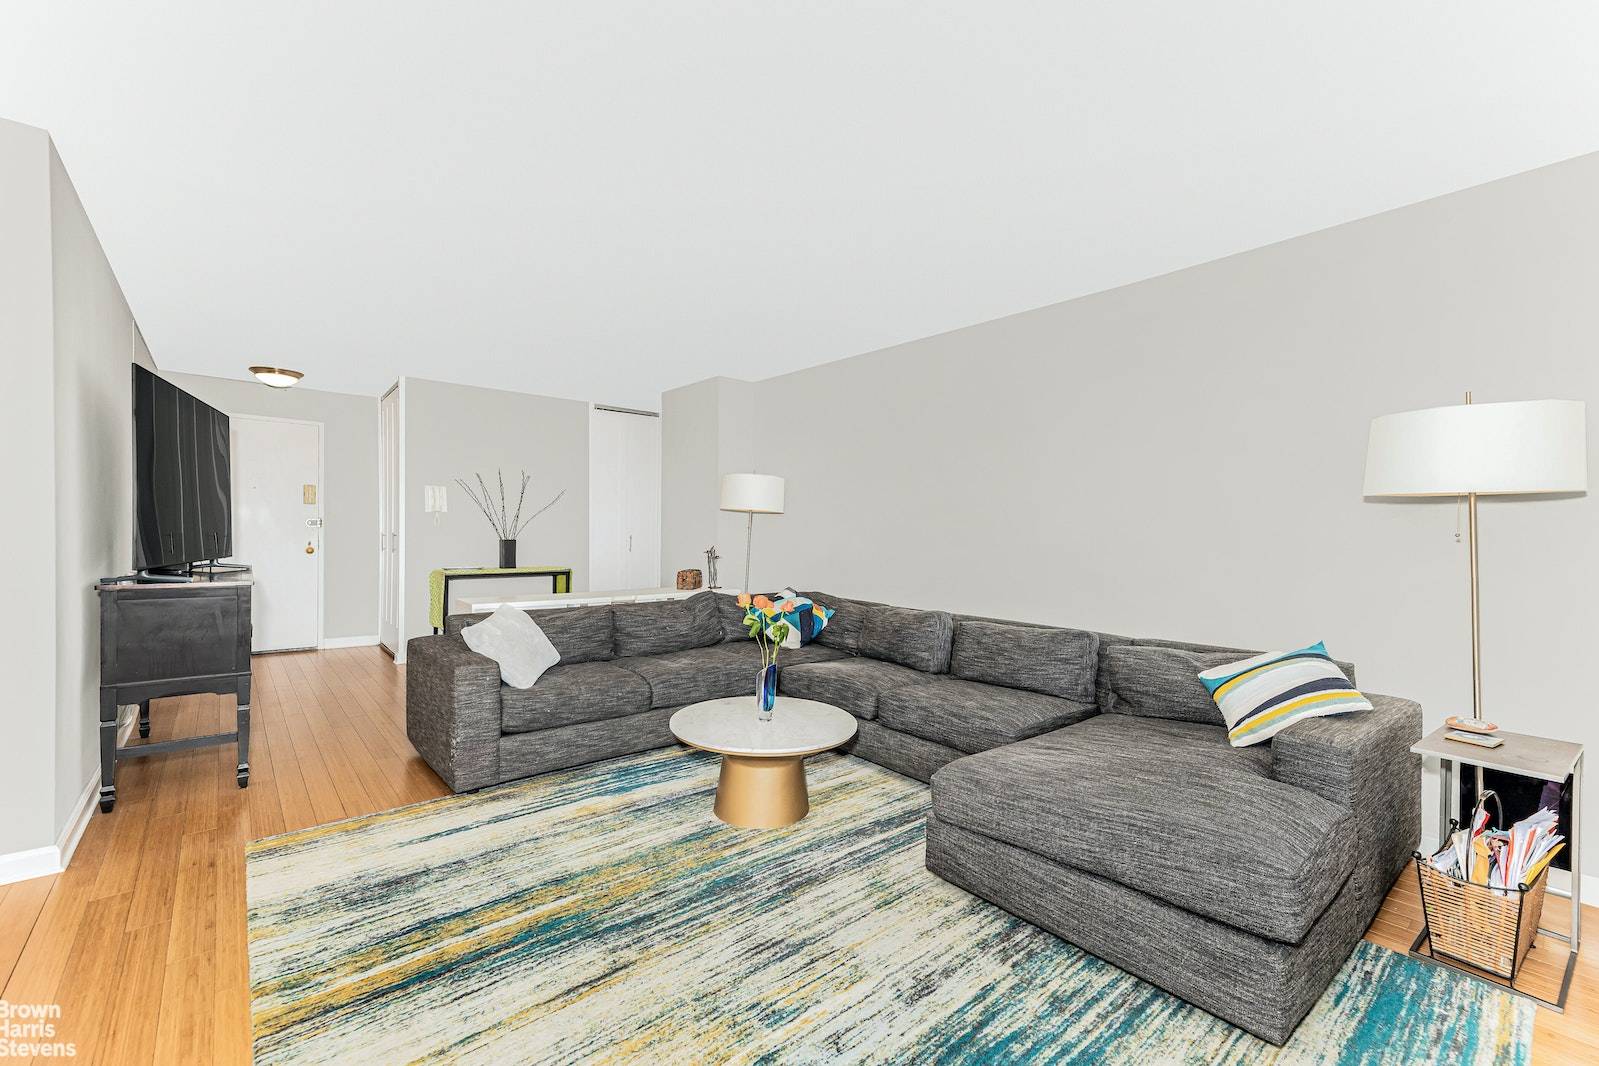 If you are looking for a large, light, bright, totally renovated two bedroom, two bath with a large terrace facing the Hudson River, look no more.